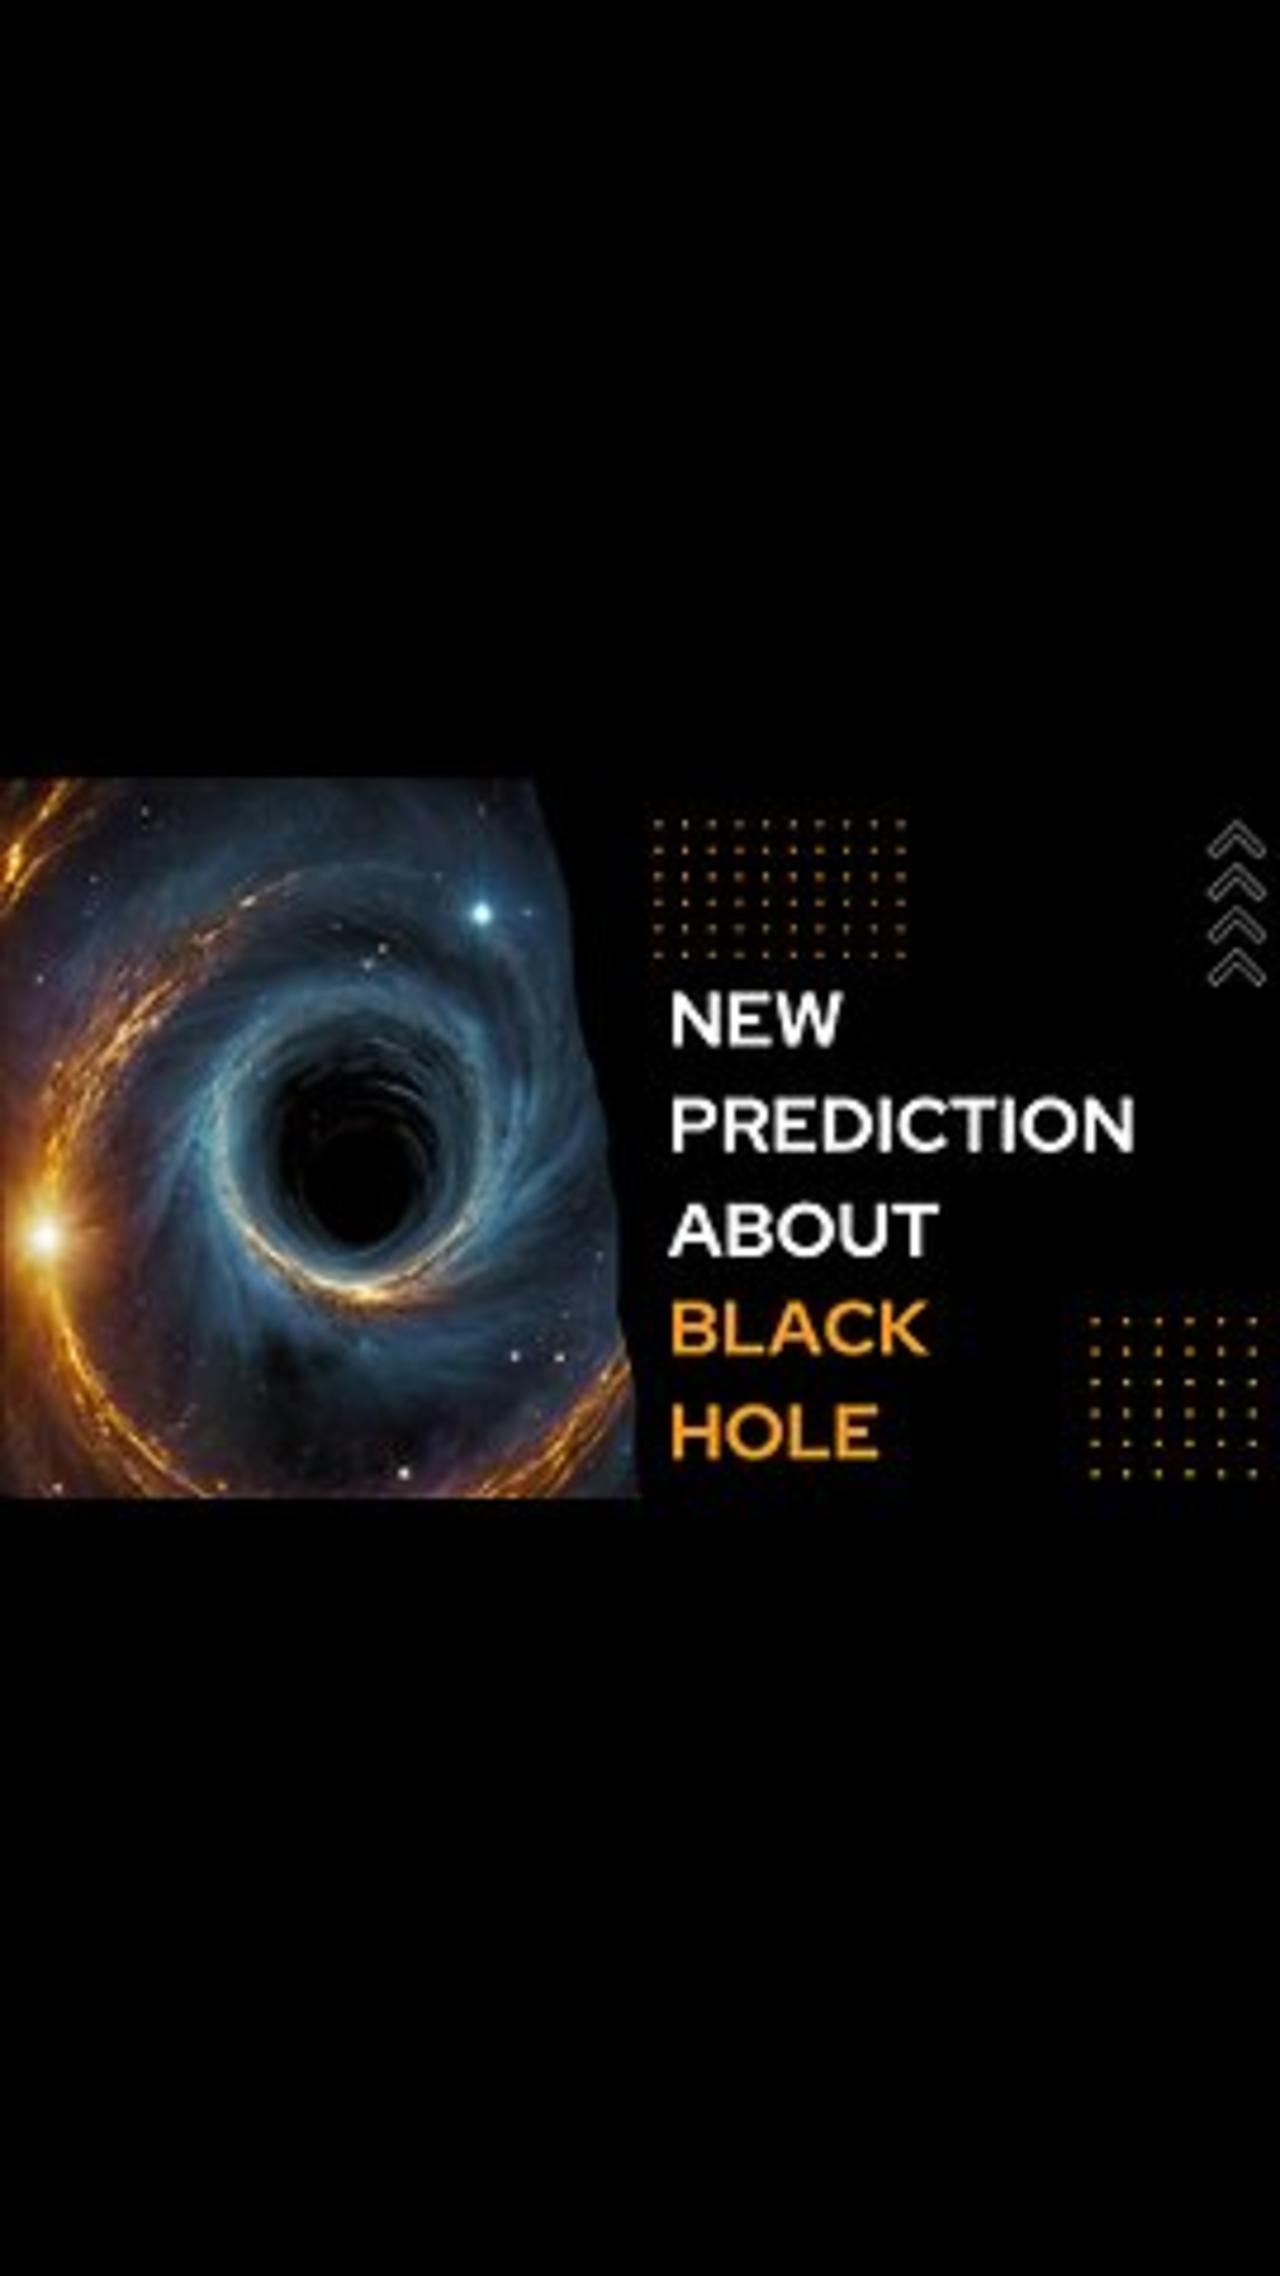 Einstein's Theory Challenged: Quantum Physics Proves Light Can't Form Black Holes!